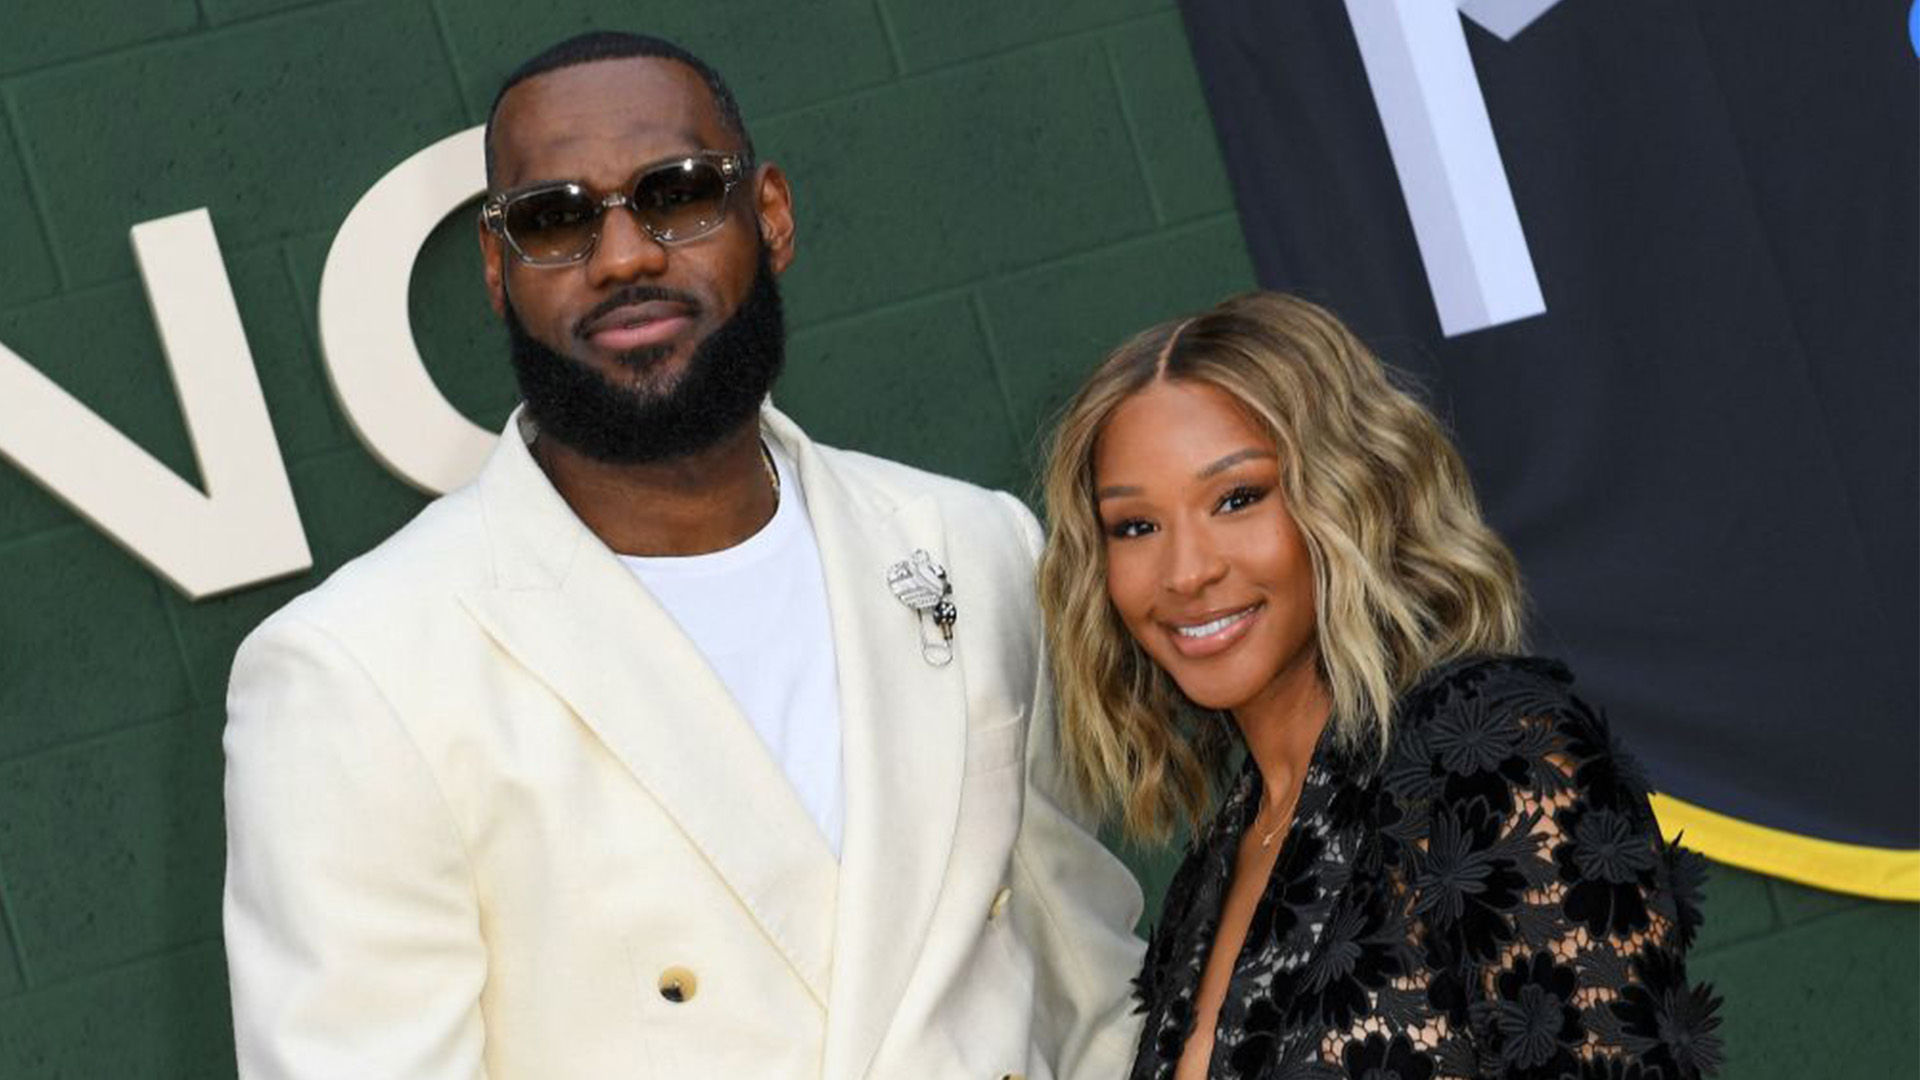 LeBron James Flexes Savannah James' Upcoming Skincare Line On Instagram — 'She Has No Idea I’m Posting This Cause She Would Actually Kill Me'